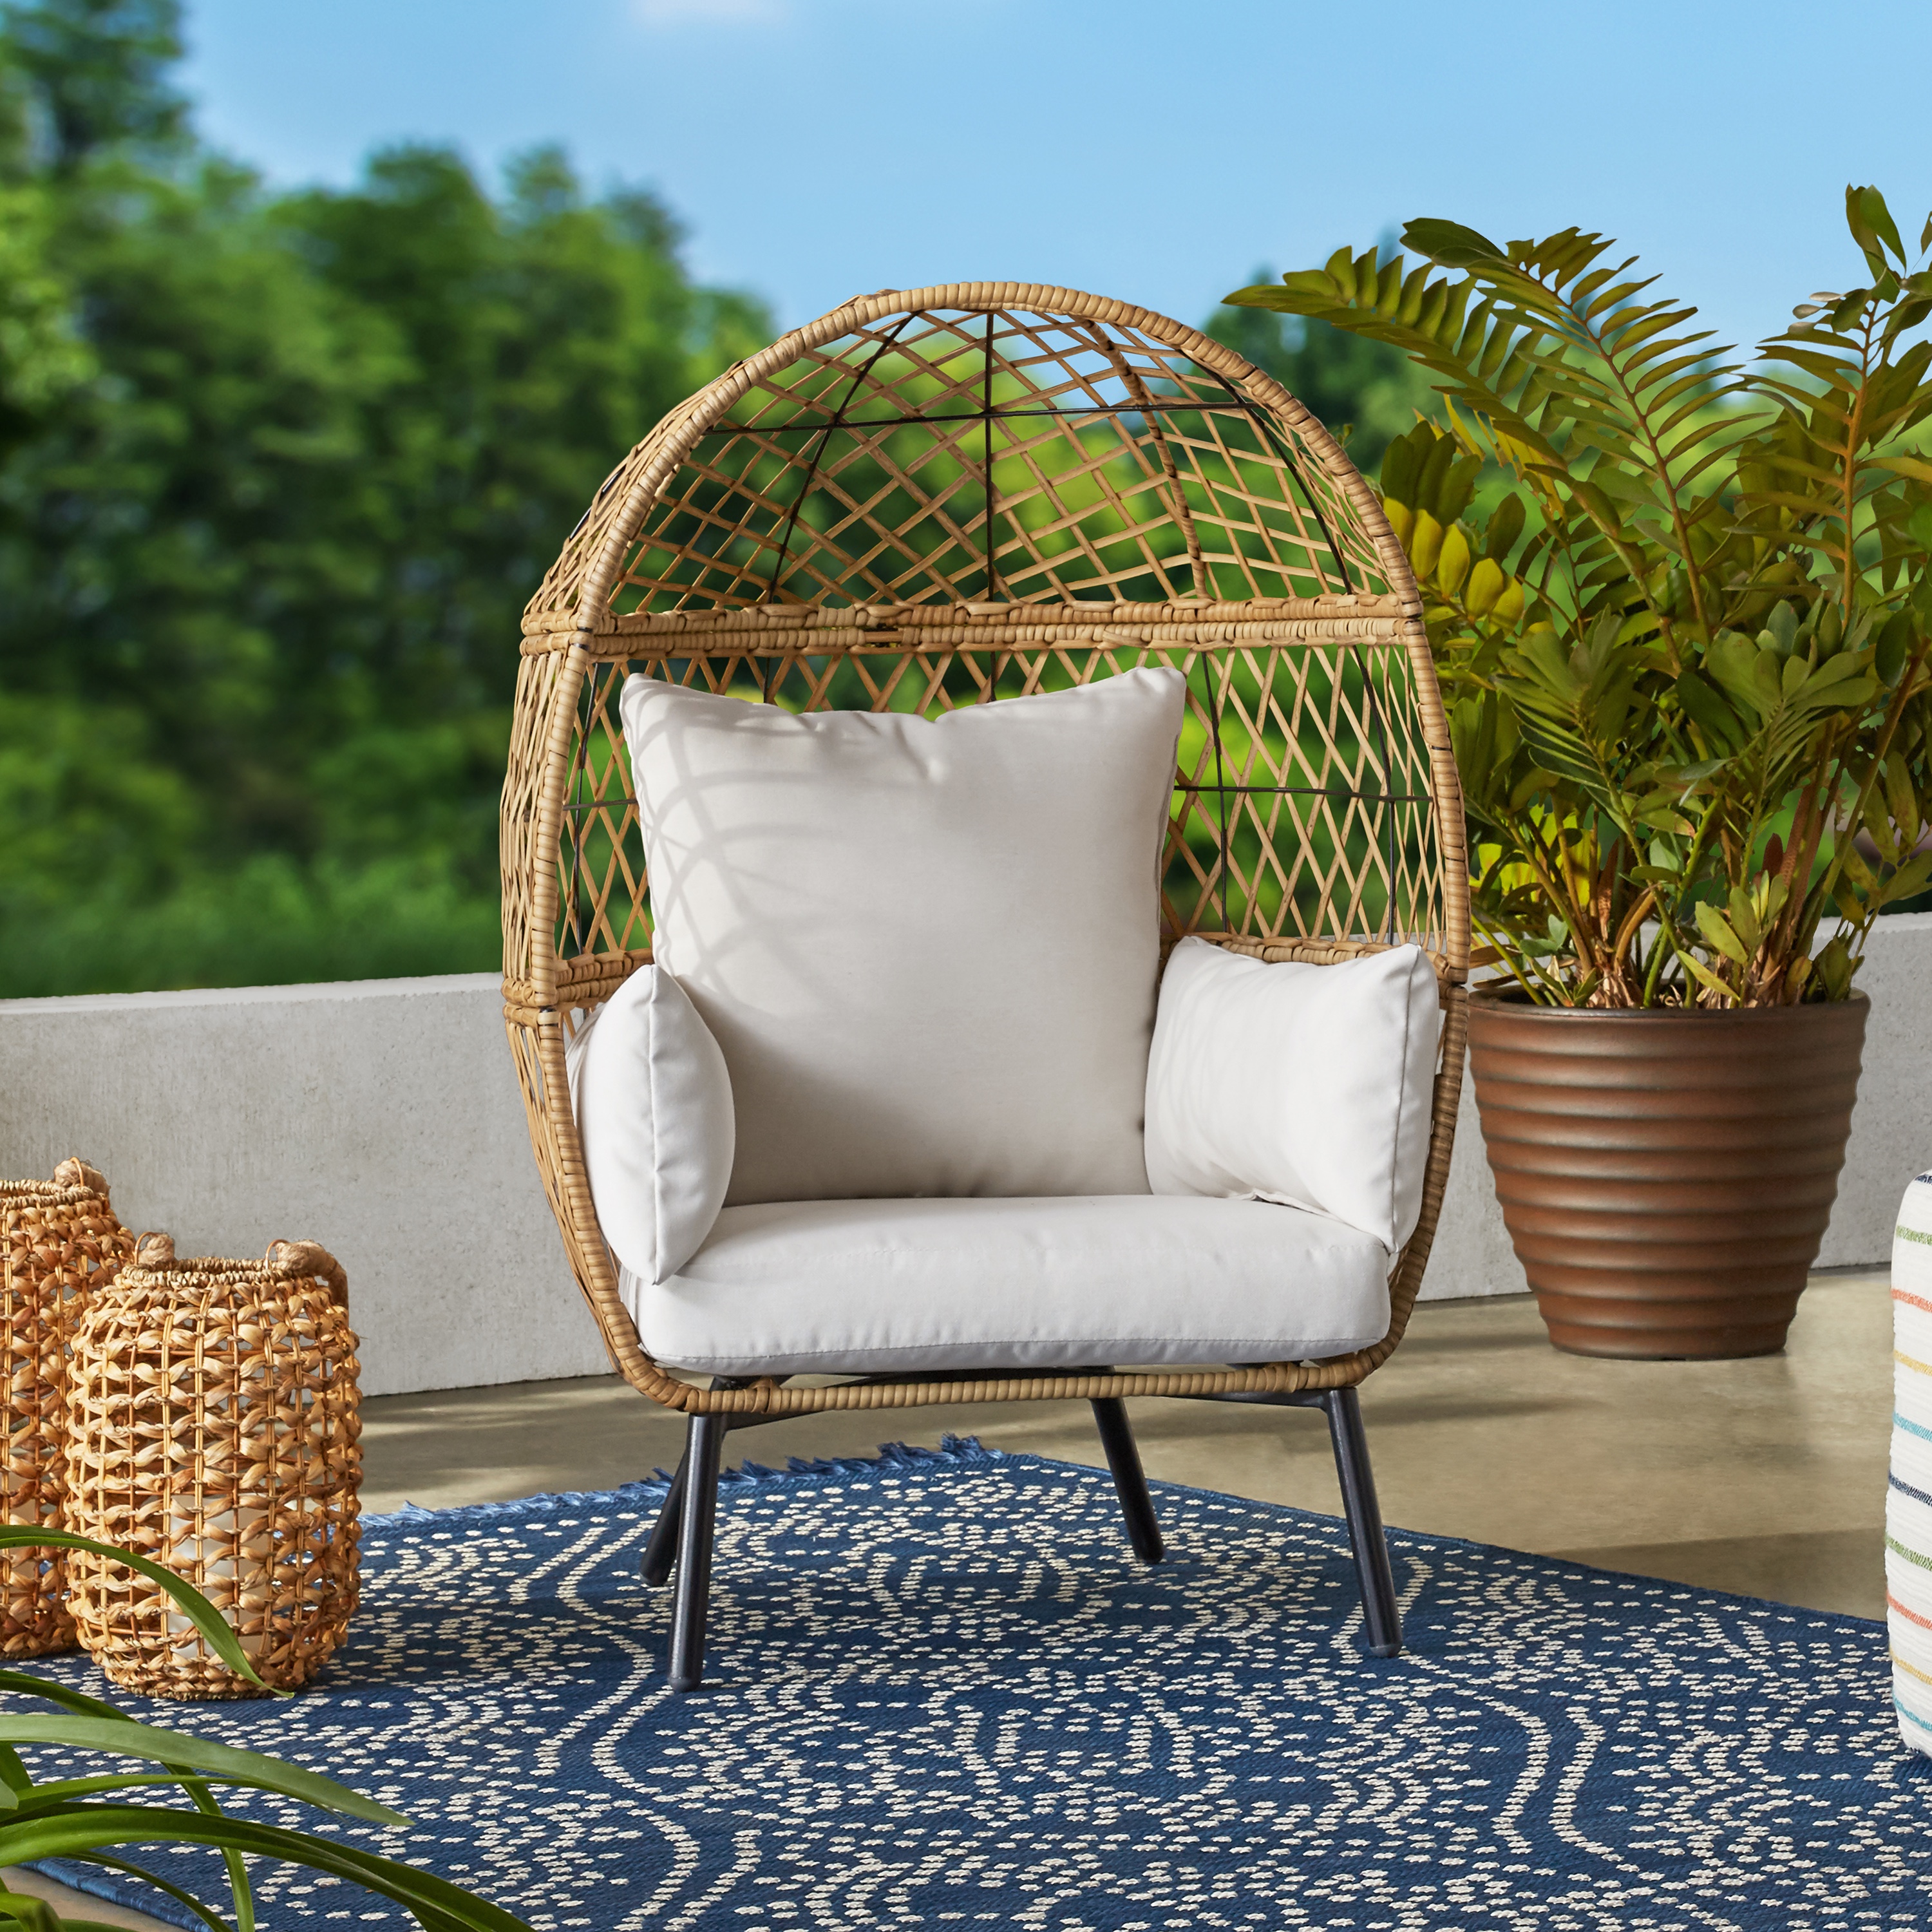 Better Homes & Gardens Kid's Ventura Outdoor Wicker Stationary Egg Chair with Cream Cushions - image 1 of 8